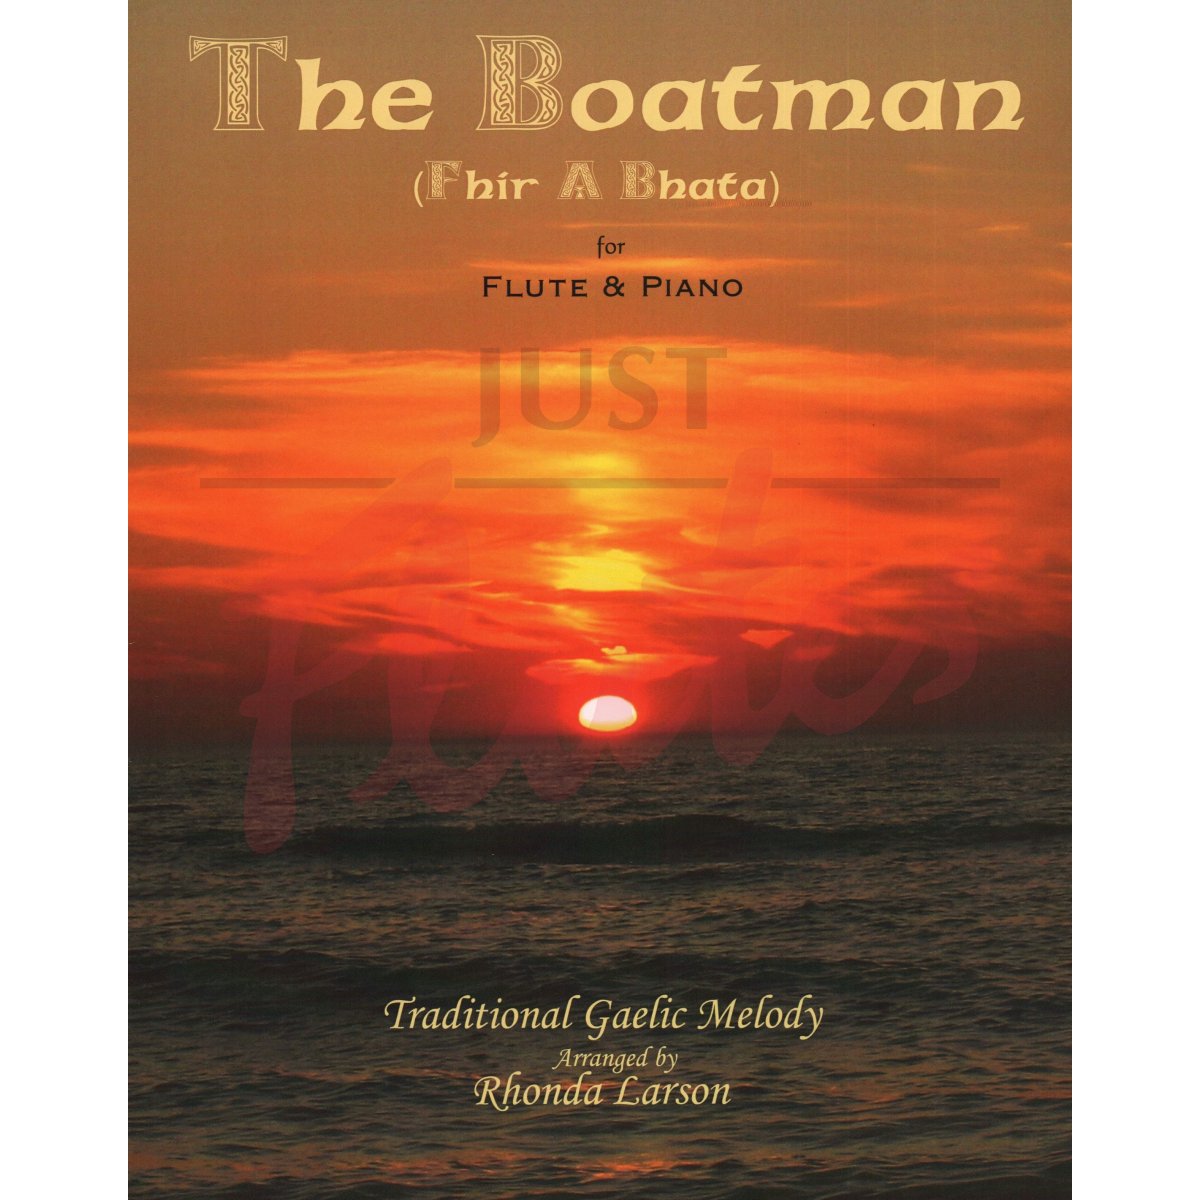 The Boatman for Flute and Piano